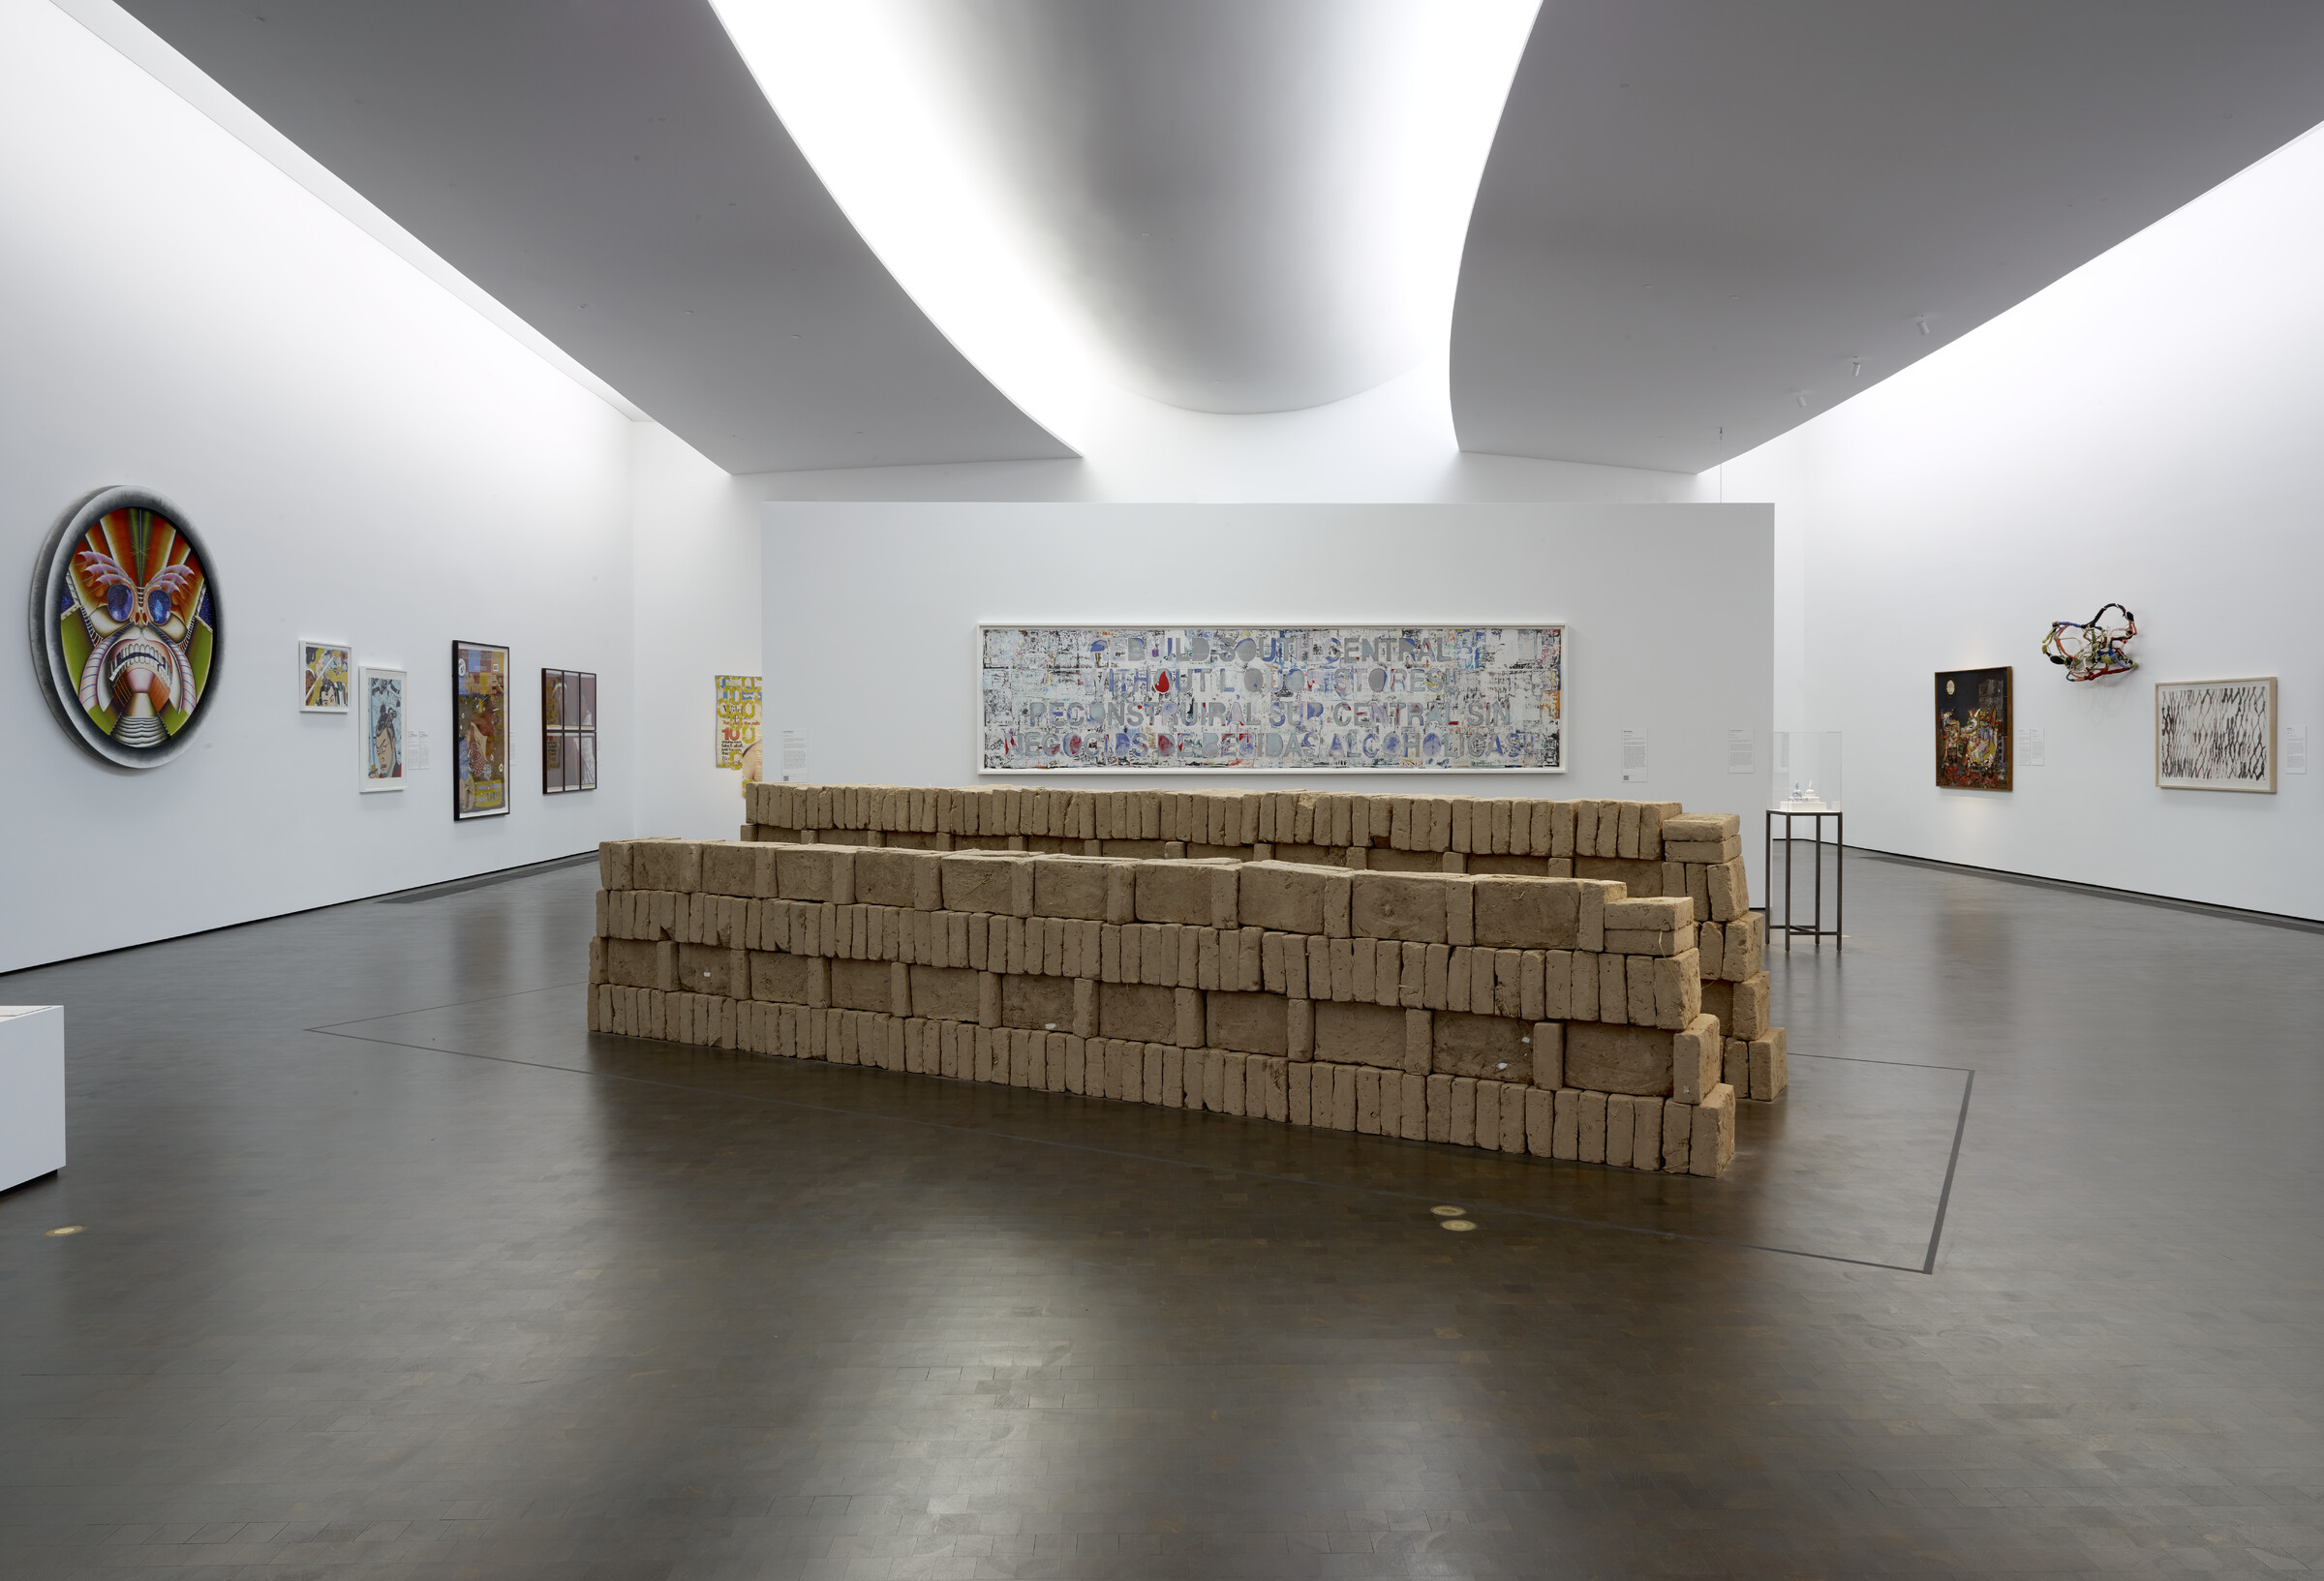 <p><i>Collectivity&nbsp;</i>in&nbsp;<i>Connecting Currents: Contemporary Art at the Museum of Fine Arts, Houston</i><br />
The Nancy and Rich Kinder Building<br />
November 21, 2020 through Summer 2022</p>
